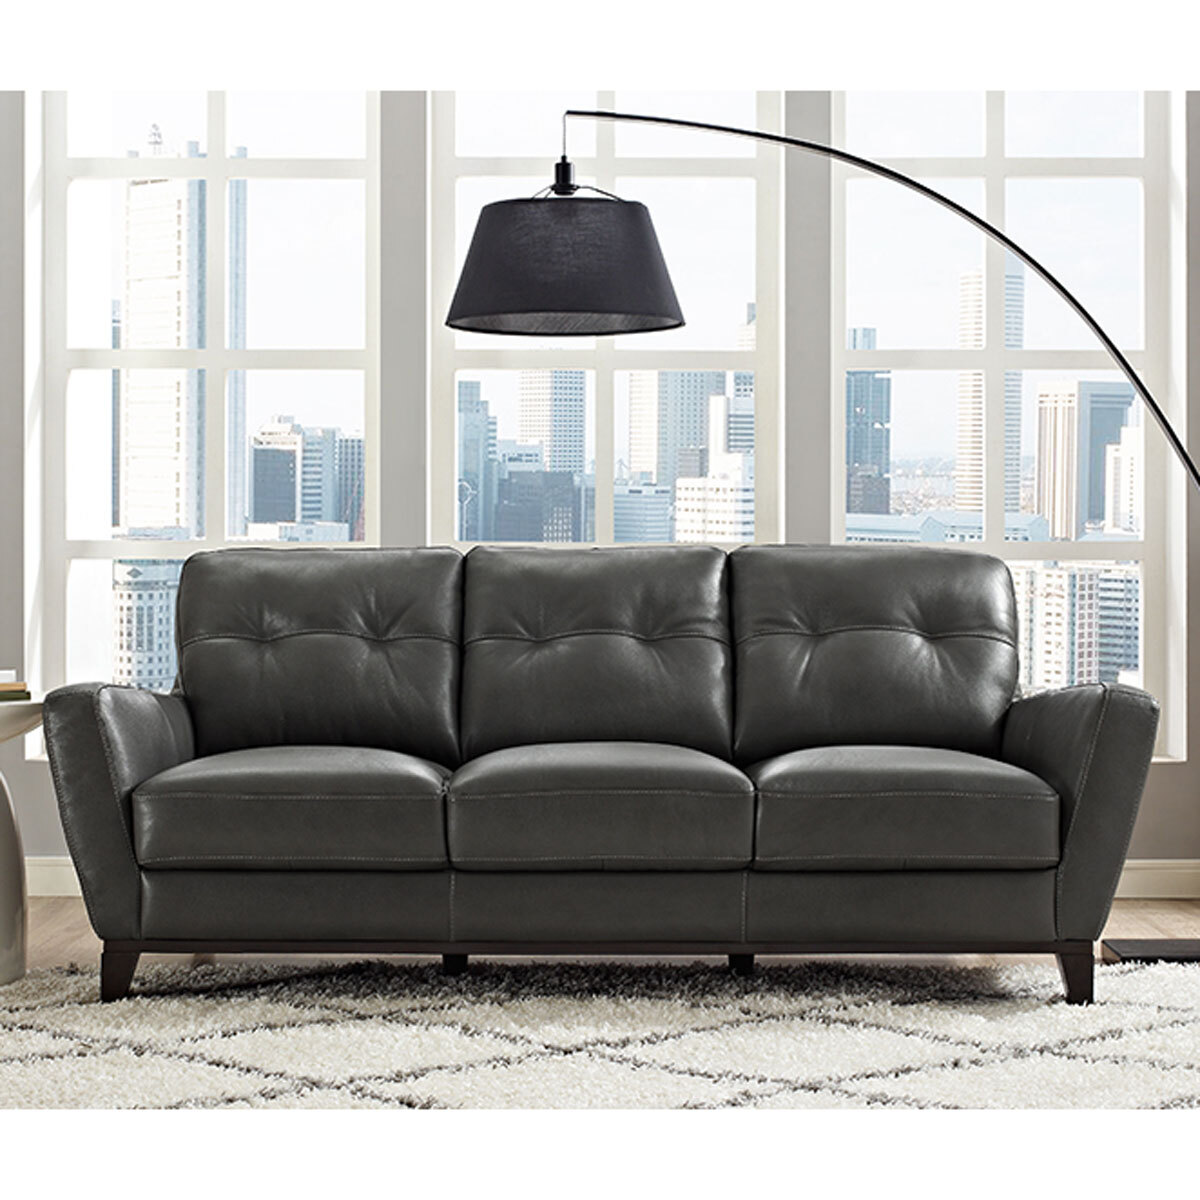 Grey Leather 3 Seater Sofa Costco Uk, Natuzzi Leather Sectional Reviews